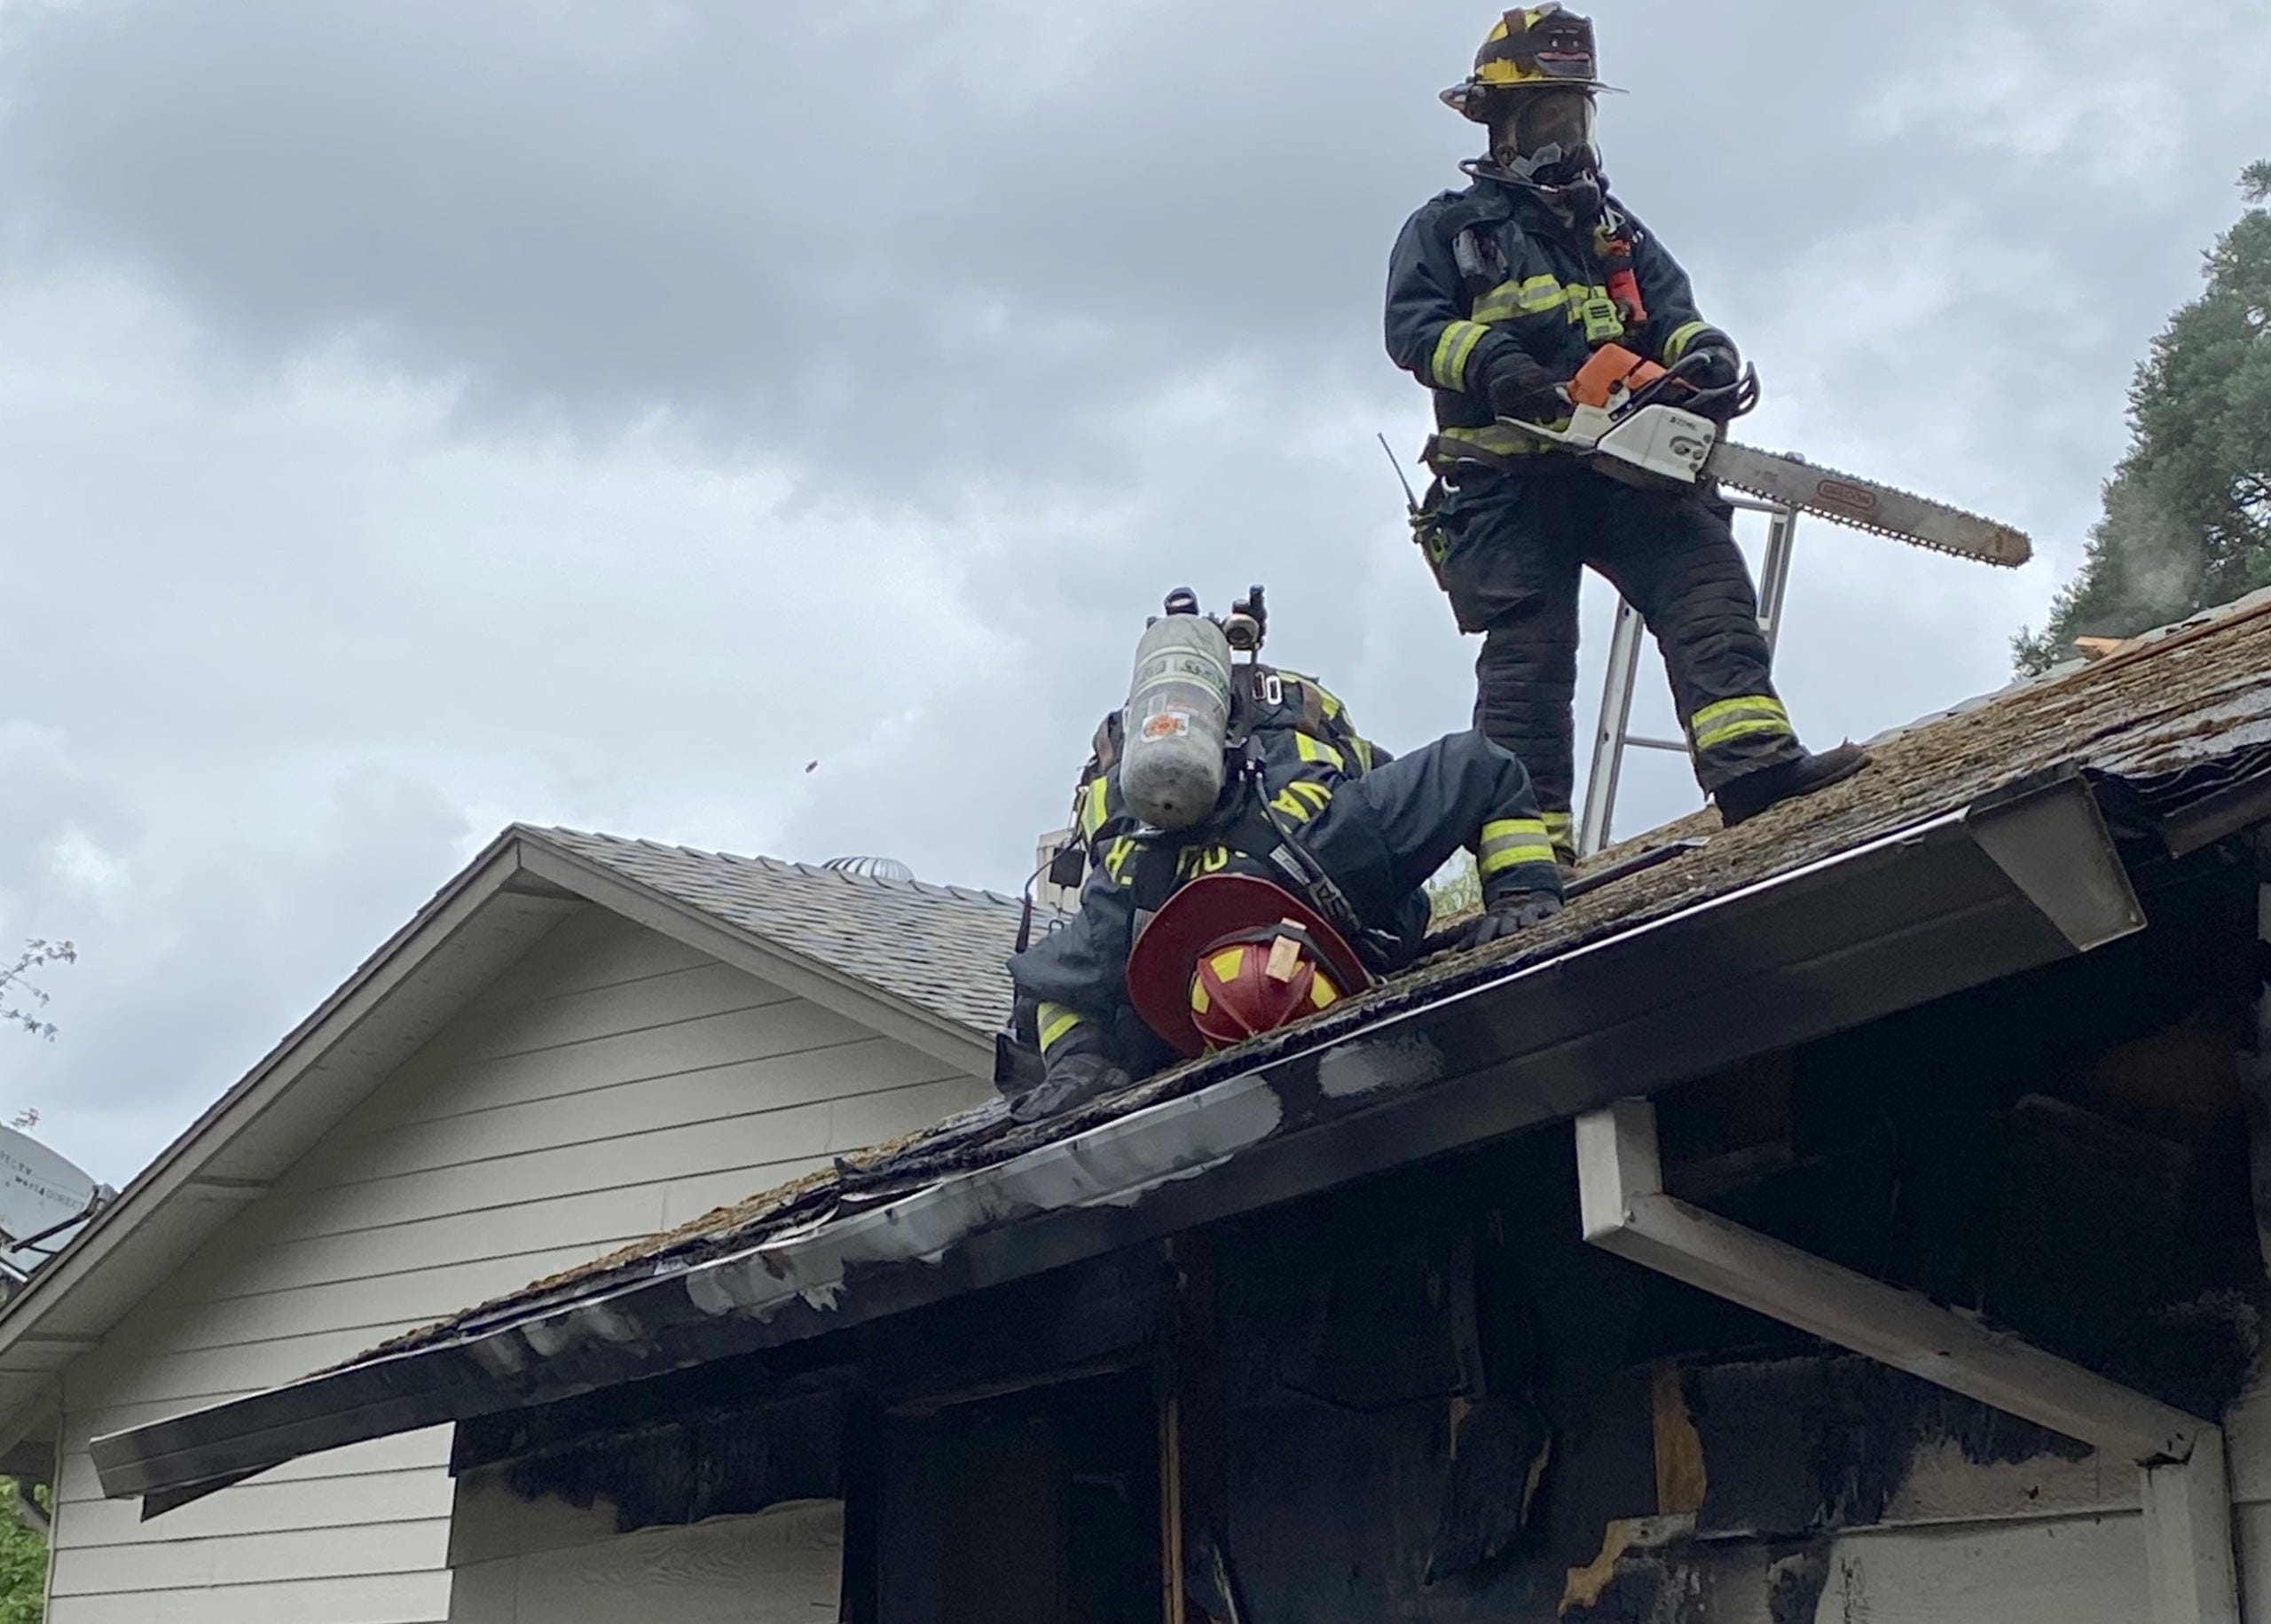 Vancouver Fire Department firefighters inspect the attic space of a garage that caught fire Monday.